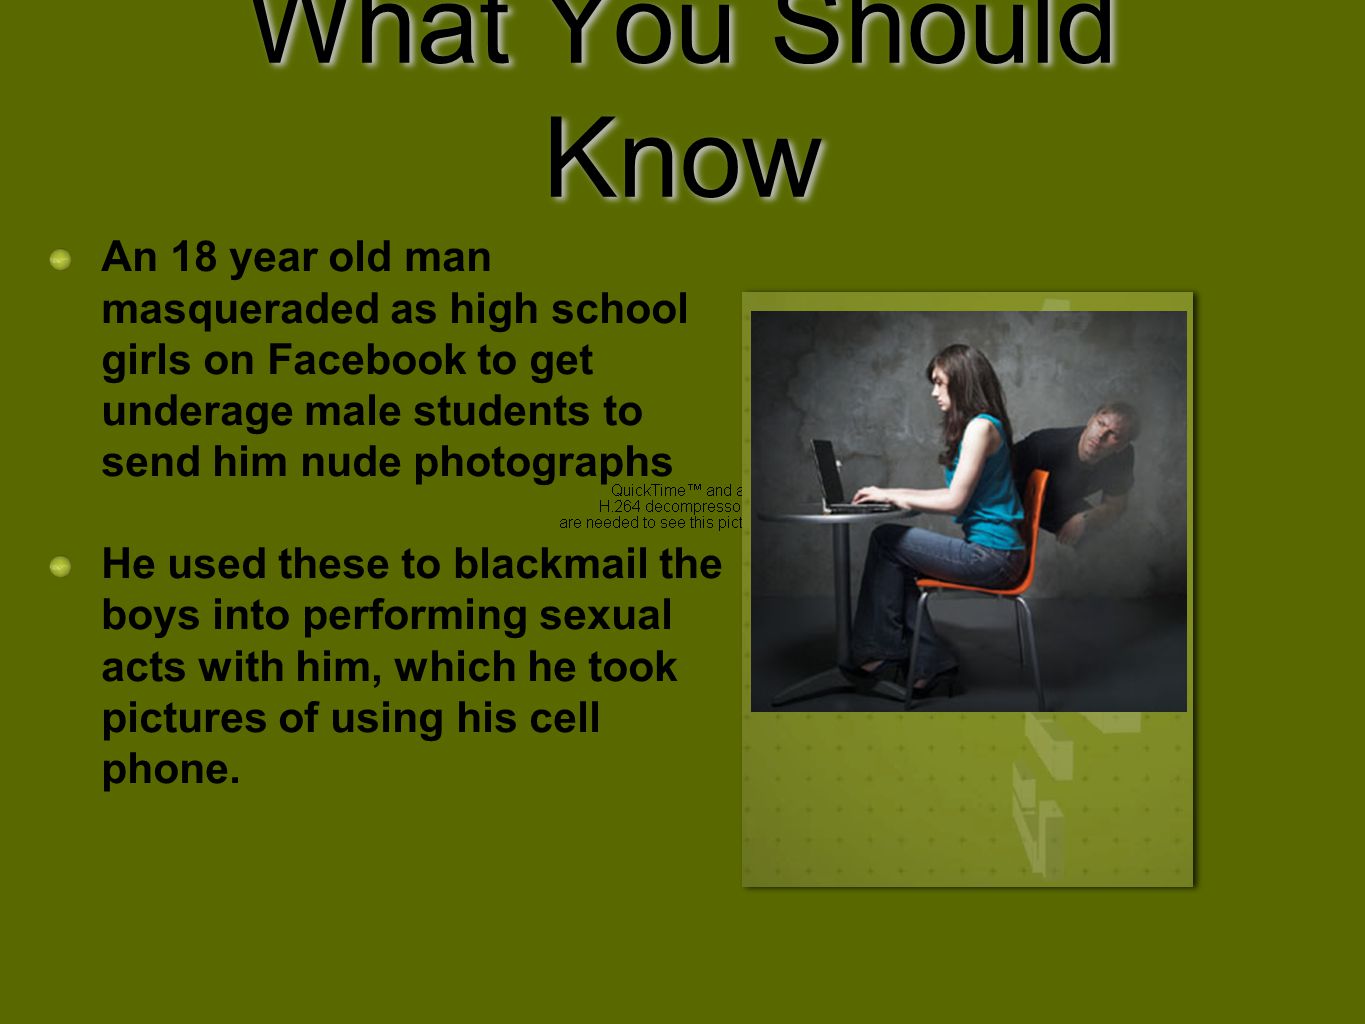 What You Should Know An 18 year old man masqueraded as high school girls on Facebook to get underage male students to send him nude photographs.